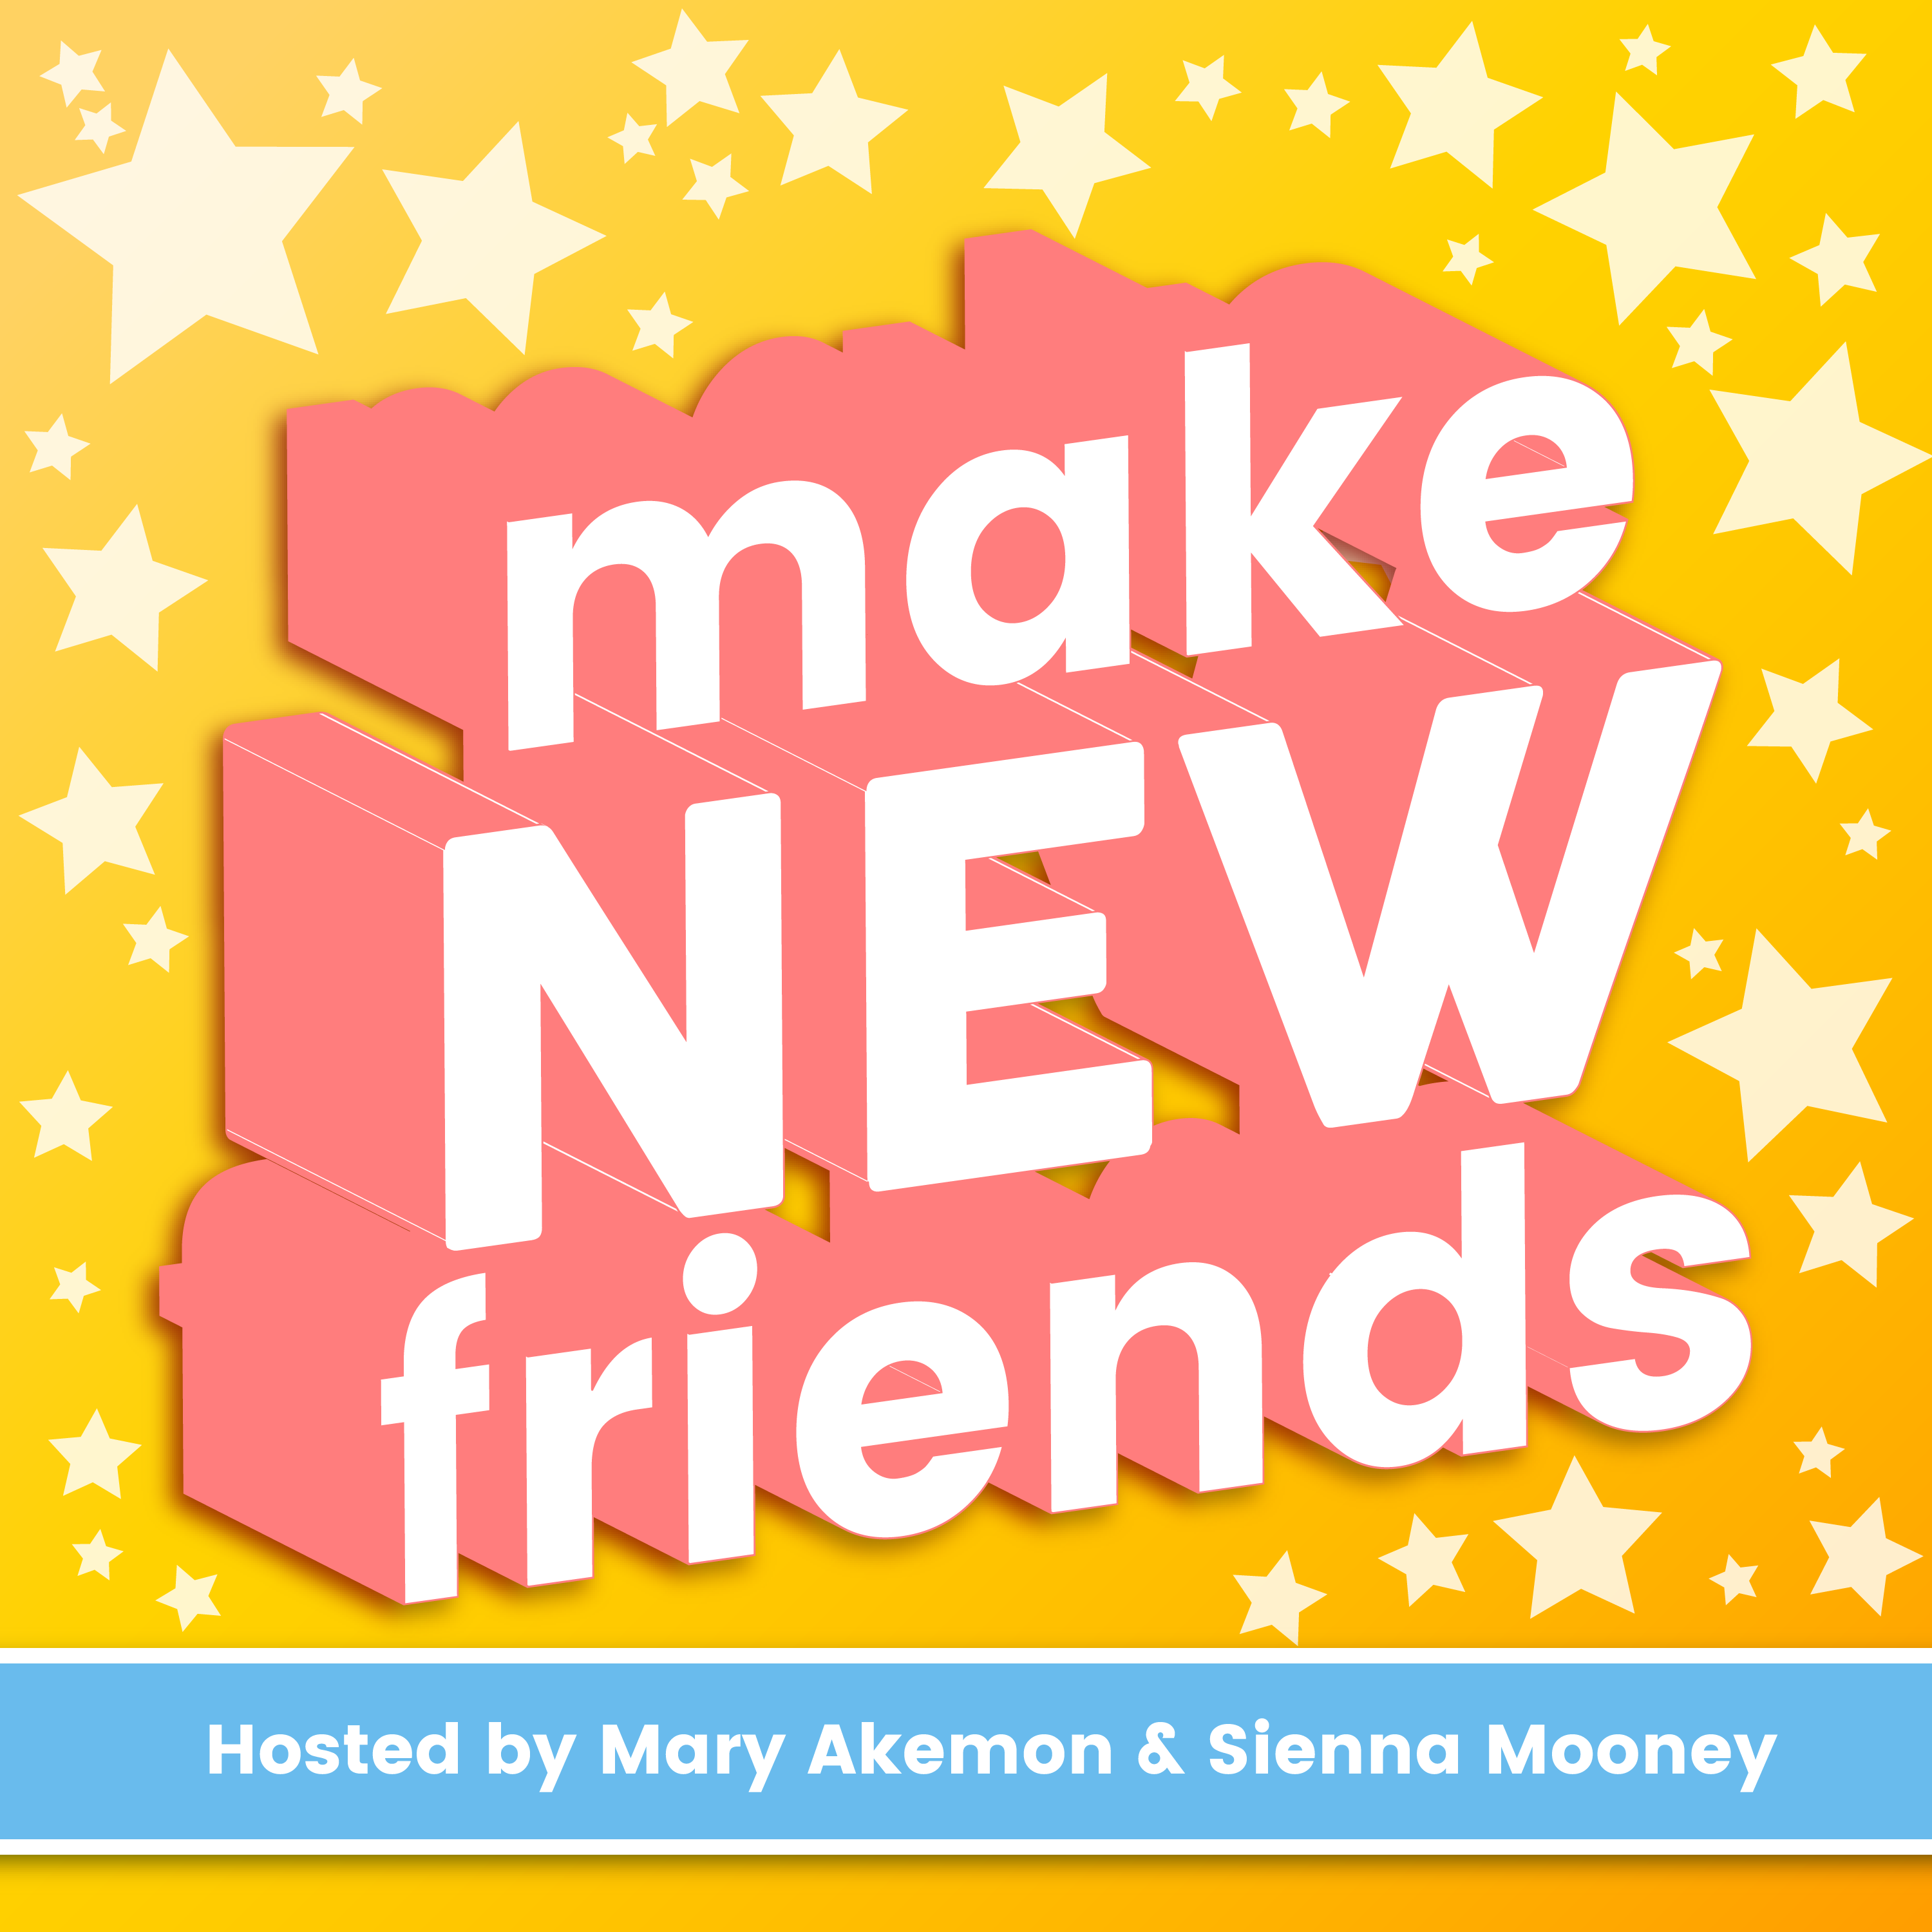 Make a new. Making New friends. Let's make a New friend. New friends 2. Let's go my friends.